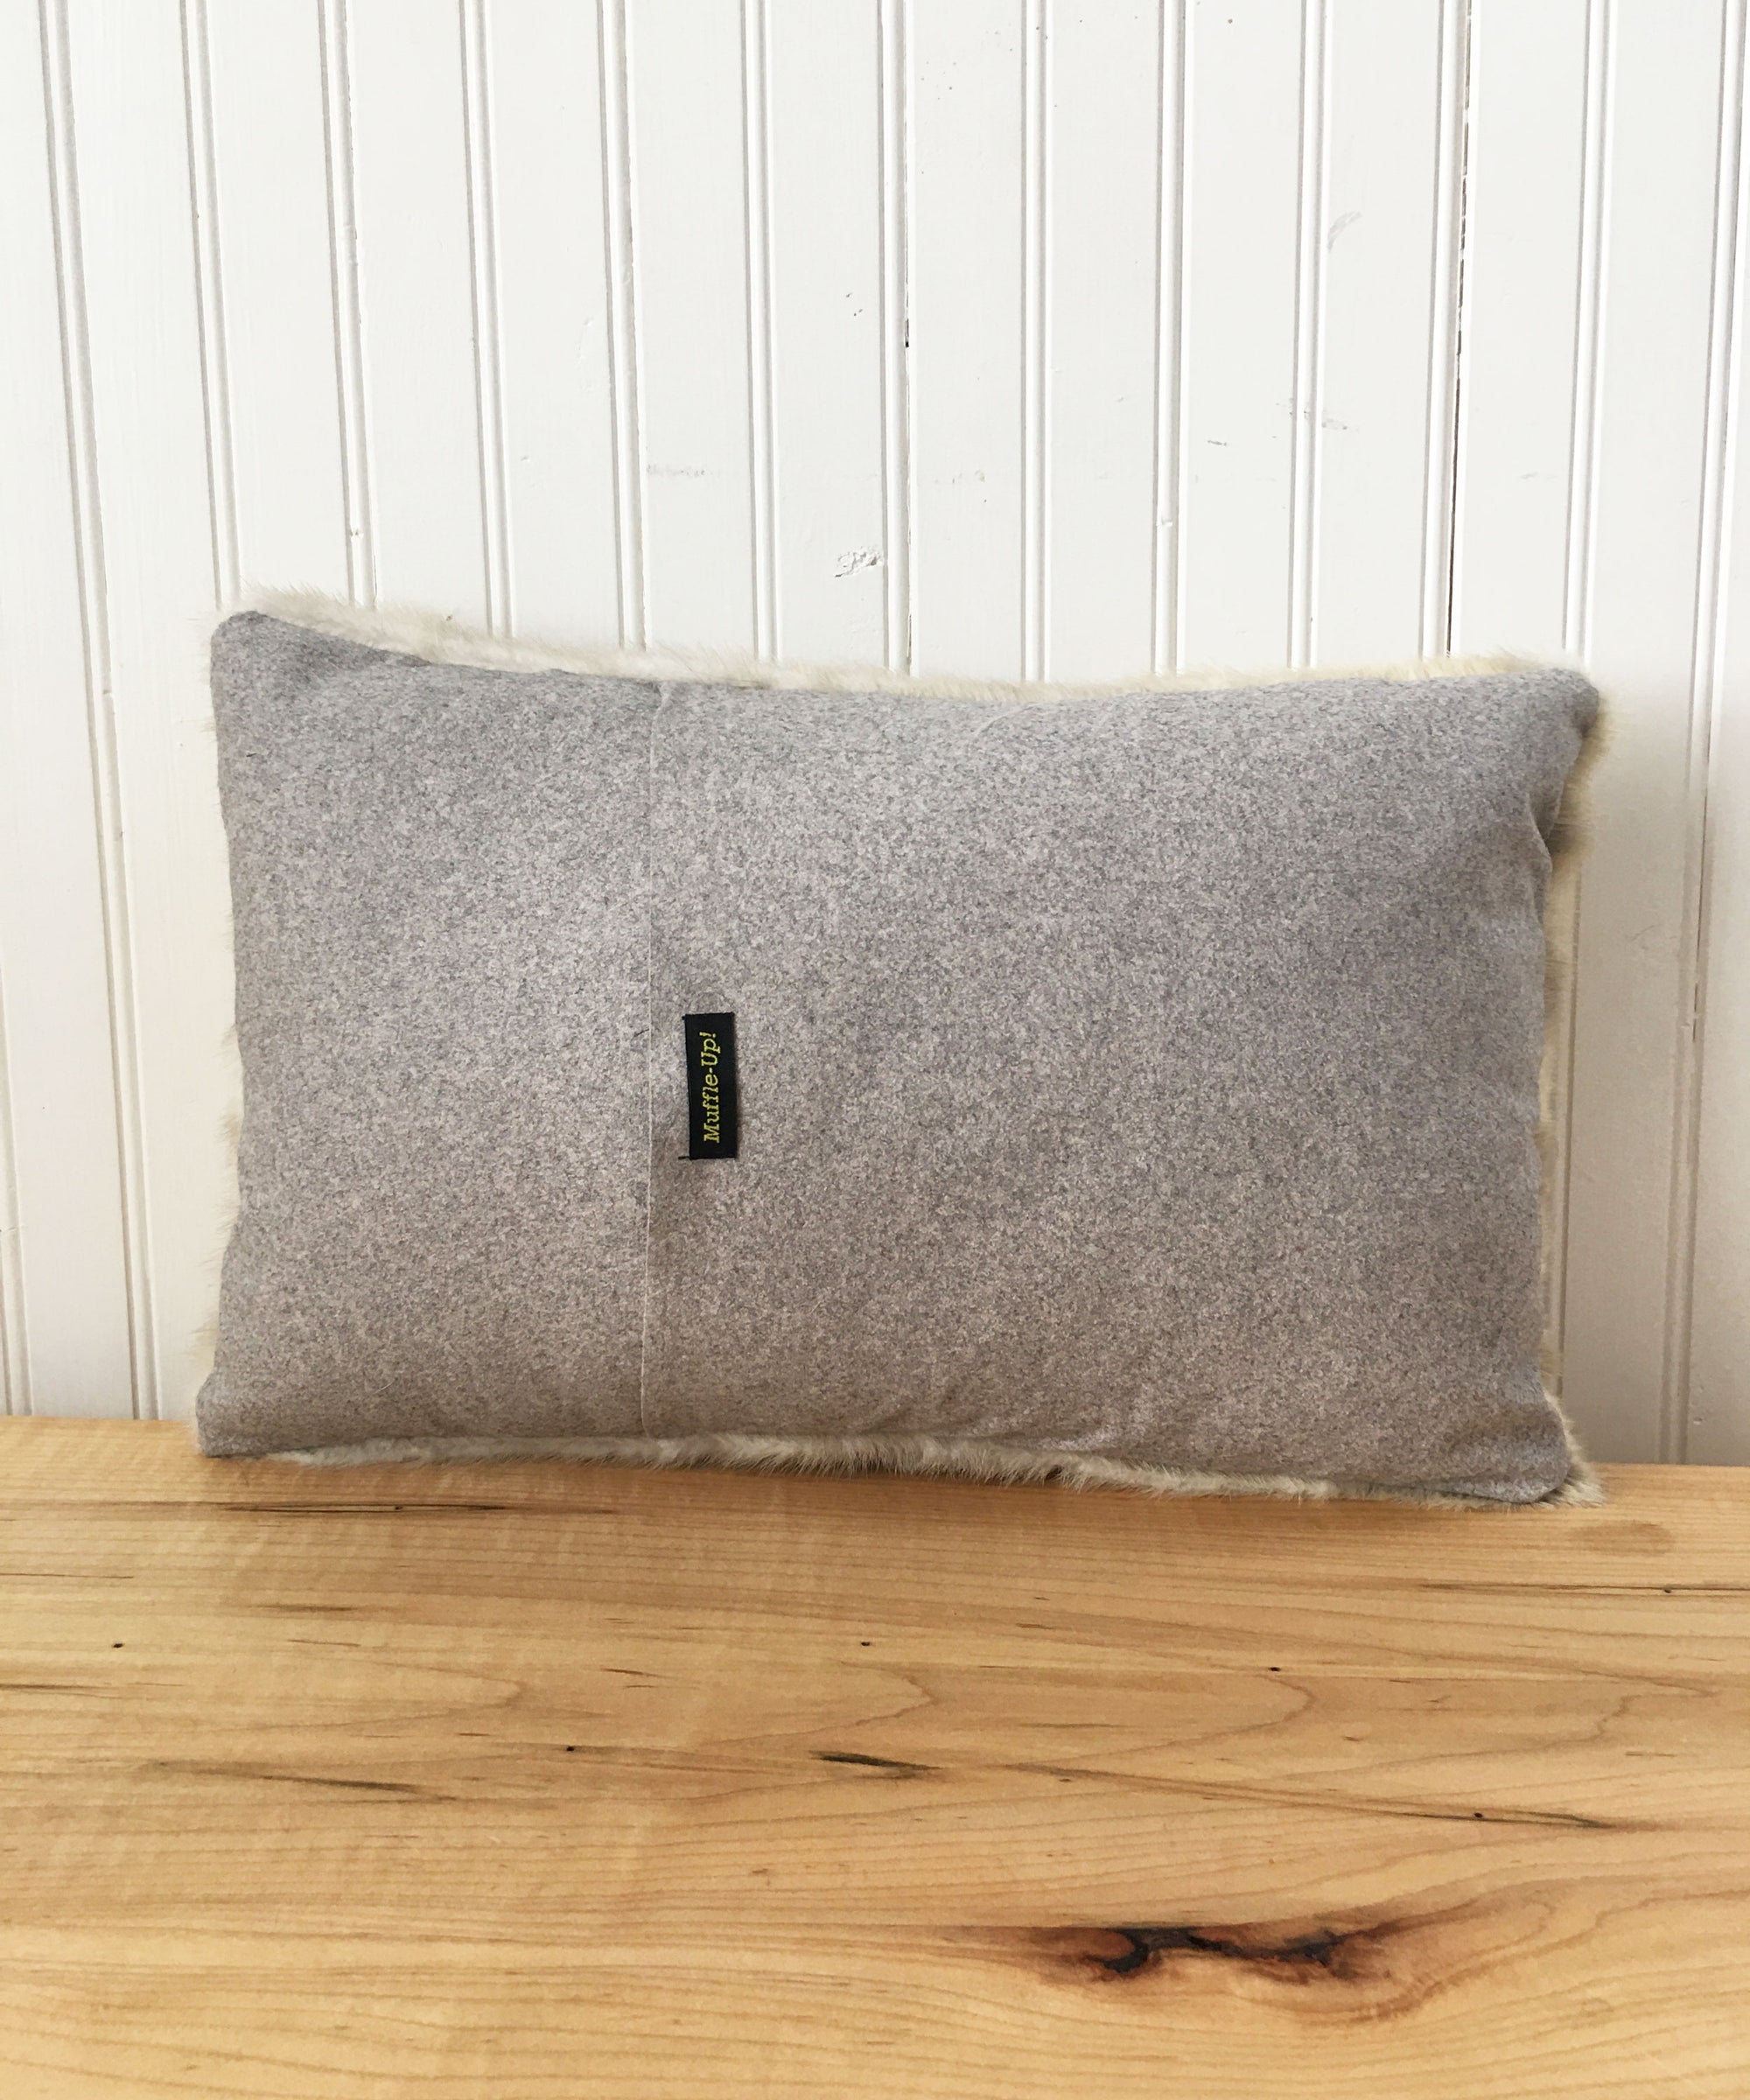 Reclaimed White Mink Fur Accent Pillows, 11" x 17"